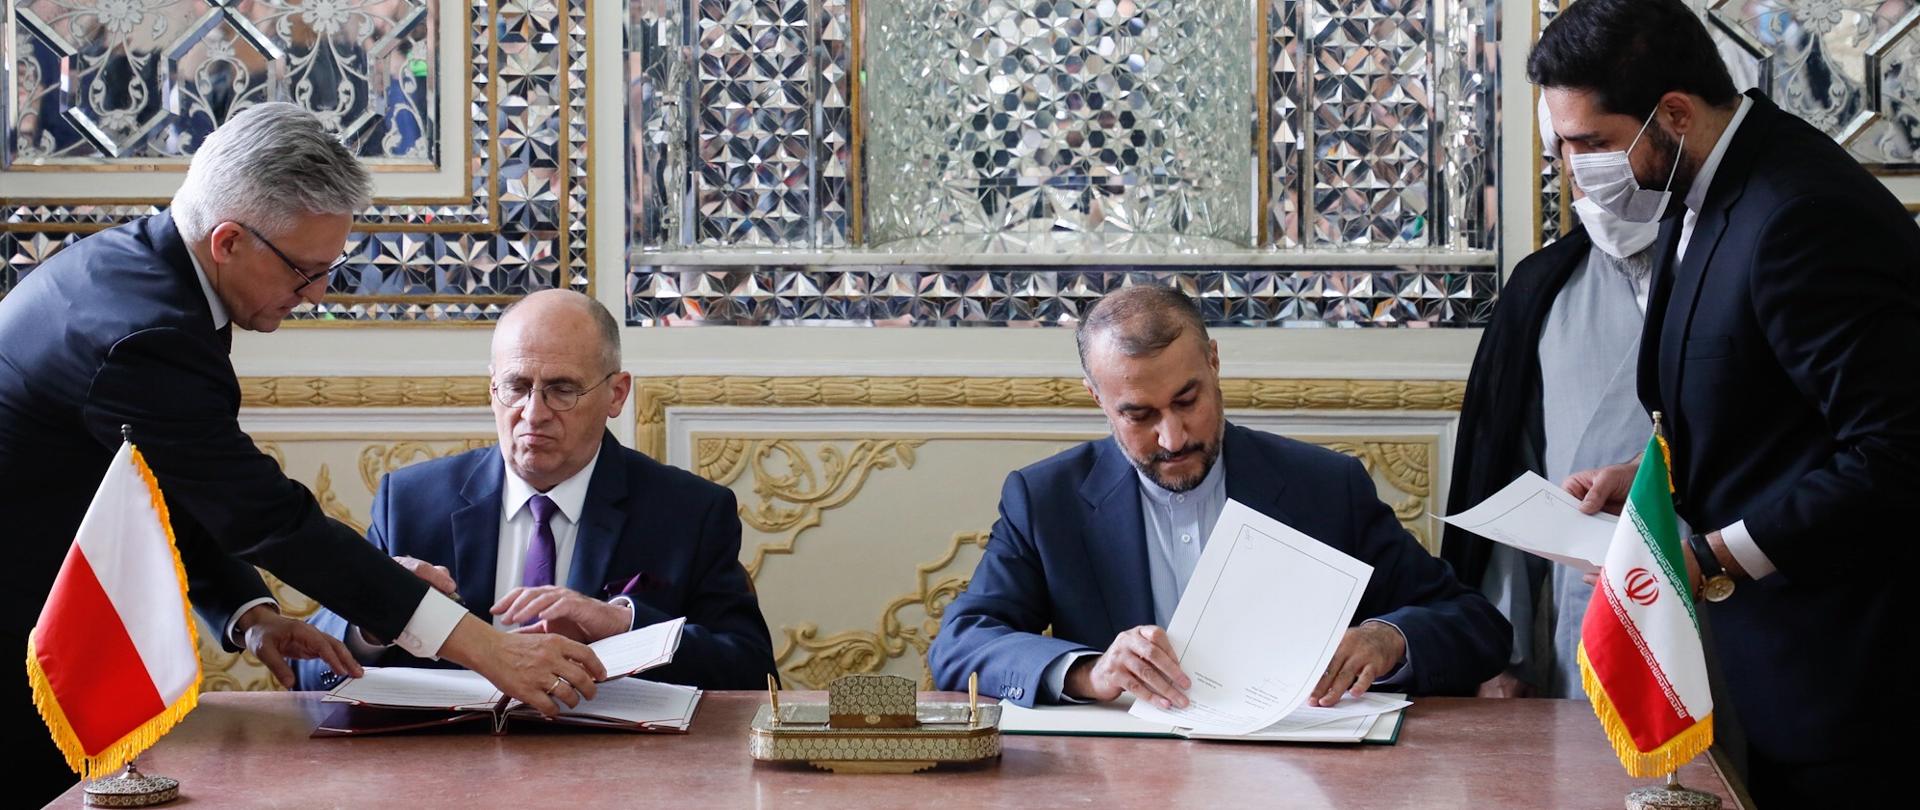 Foreign Ministers of Poland and Iran sign the agreement of cooperation